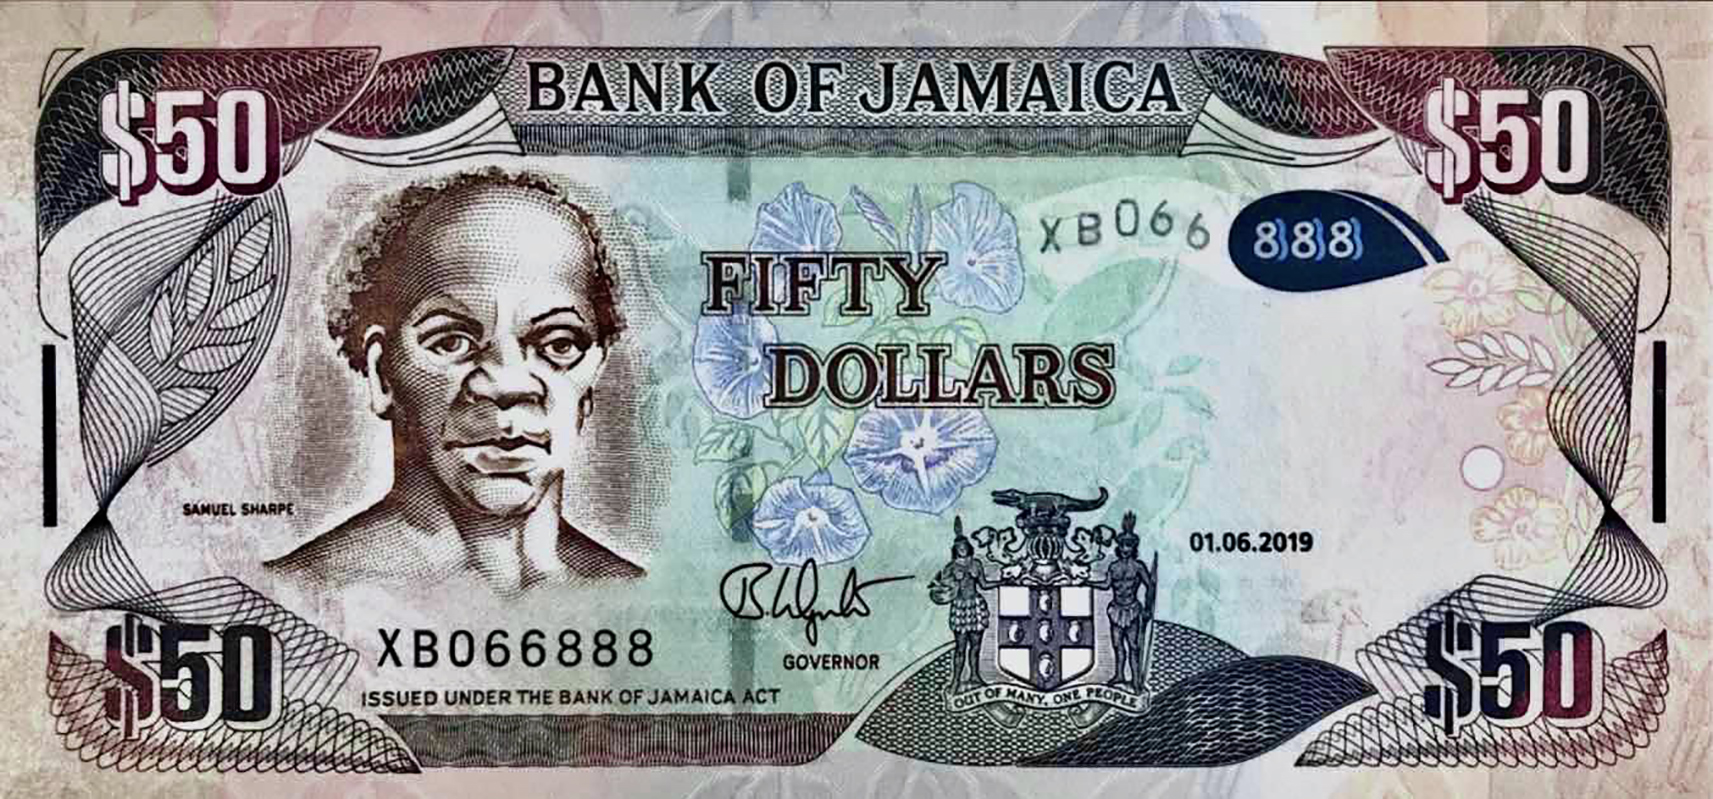 Jamaica 50 Dollars - Foreign Currency